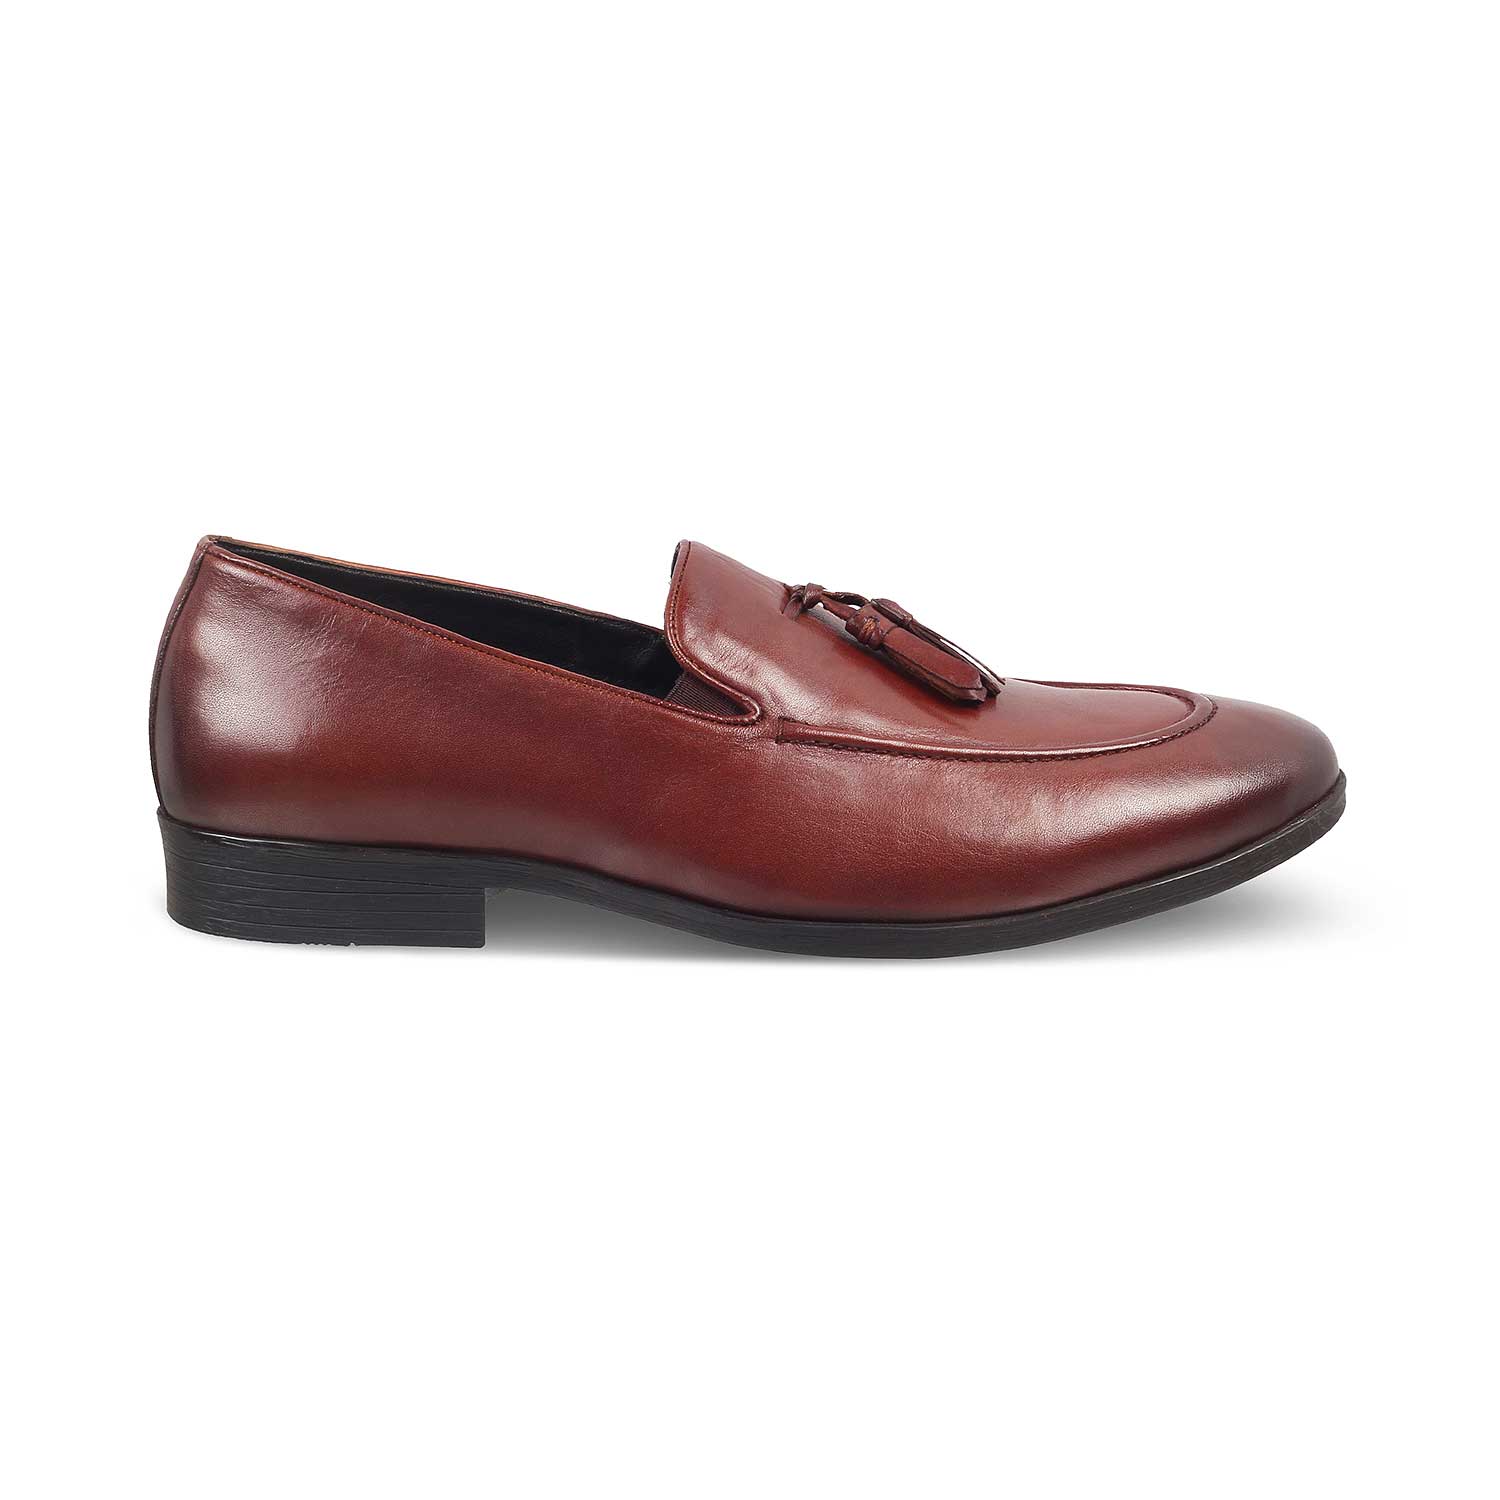 The Michan Tan Men's Leather Tassel Loafers Tresmode - Tresmode